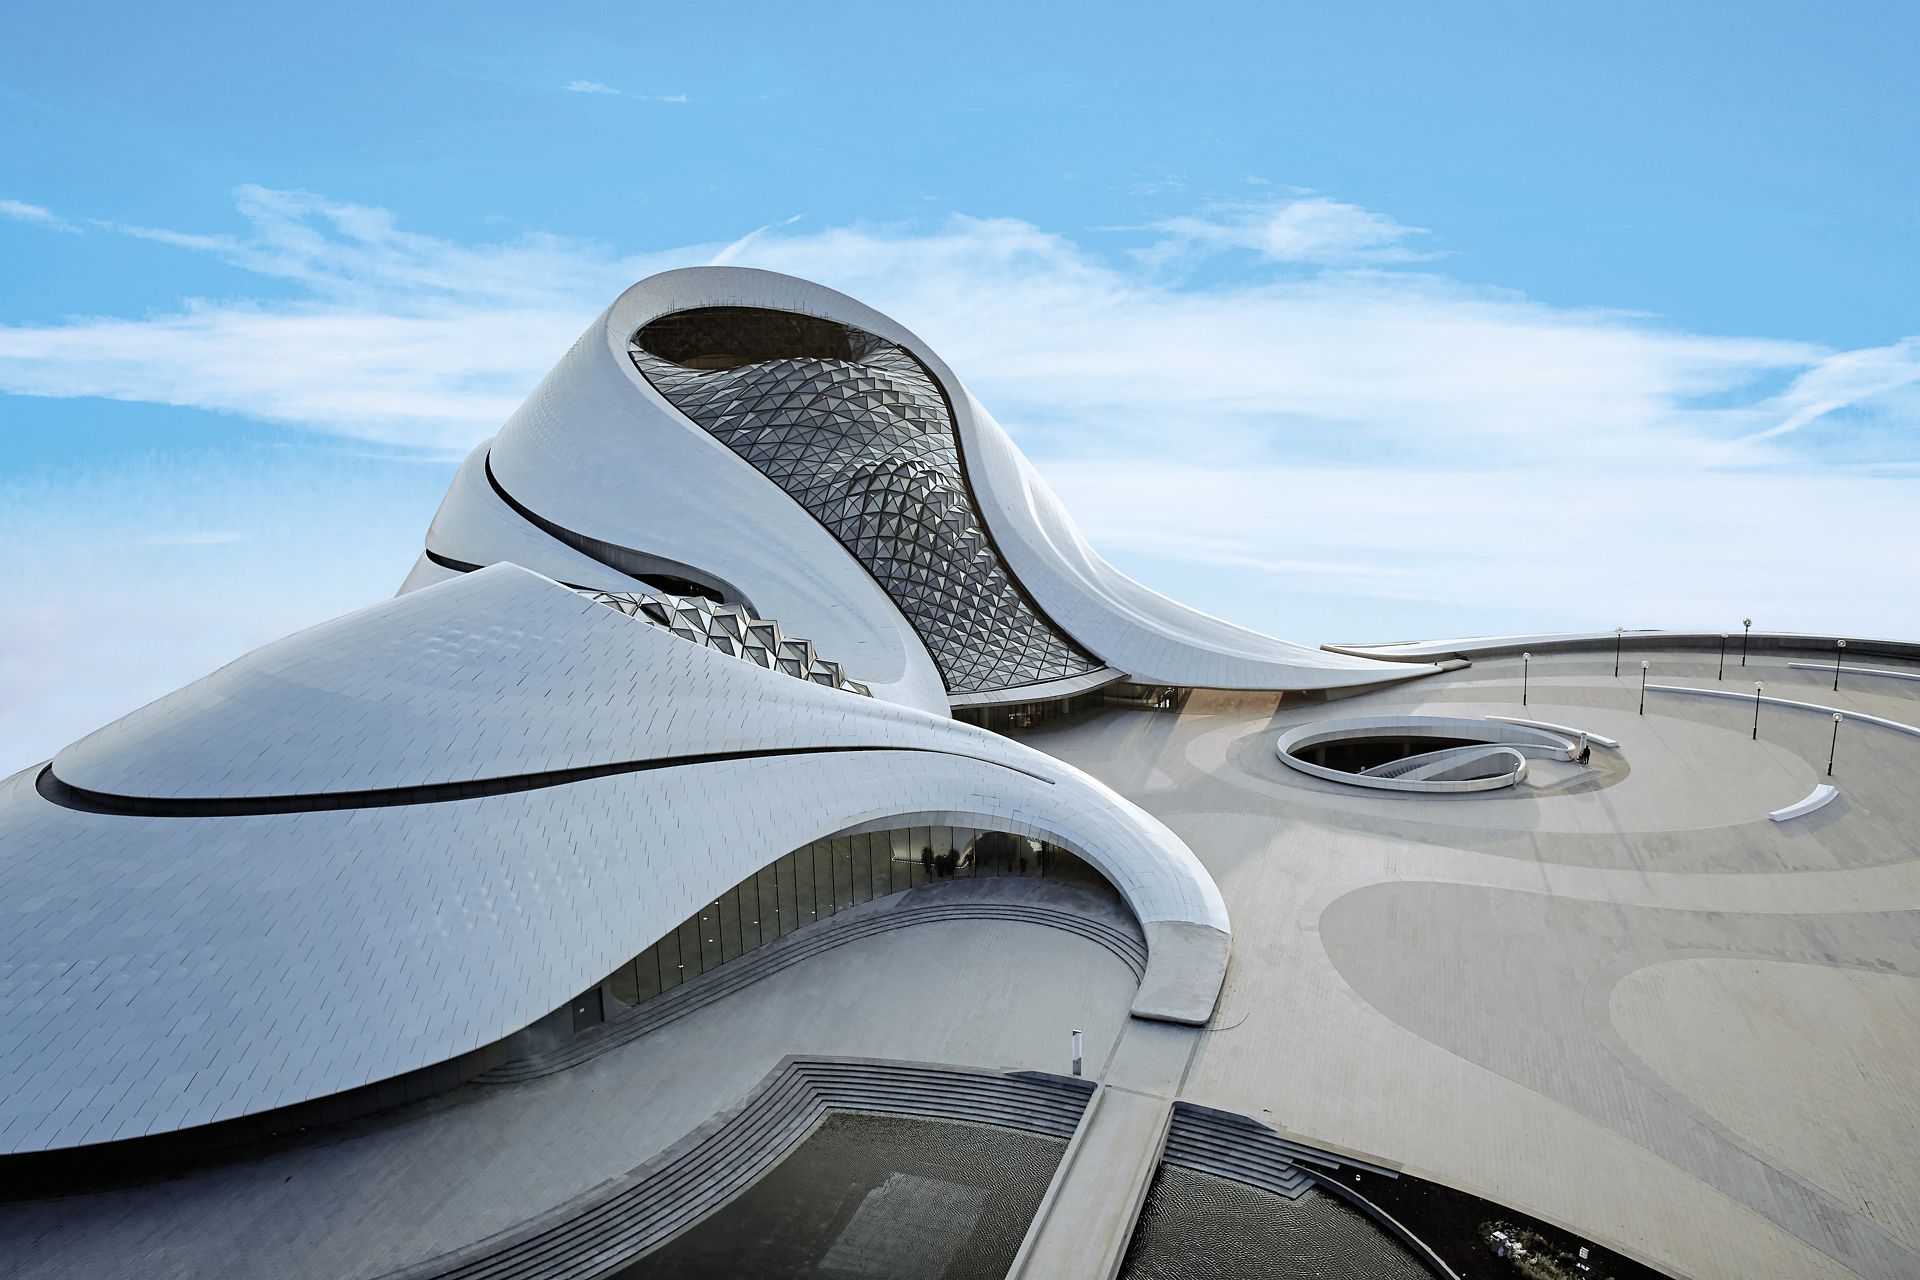 Sika Enables Great Architecture - The Harbin Opera House in China